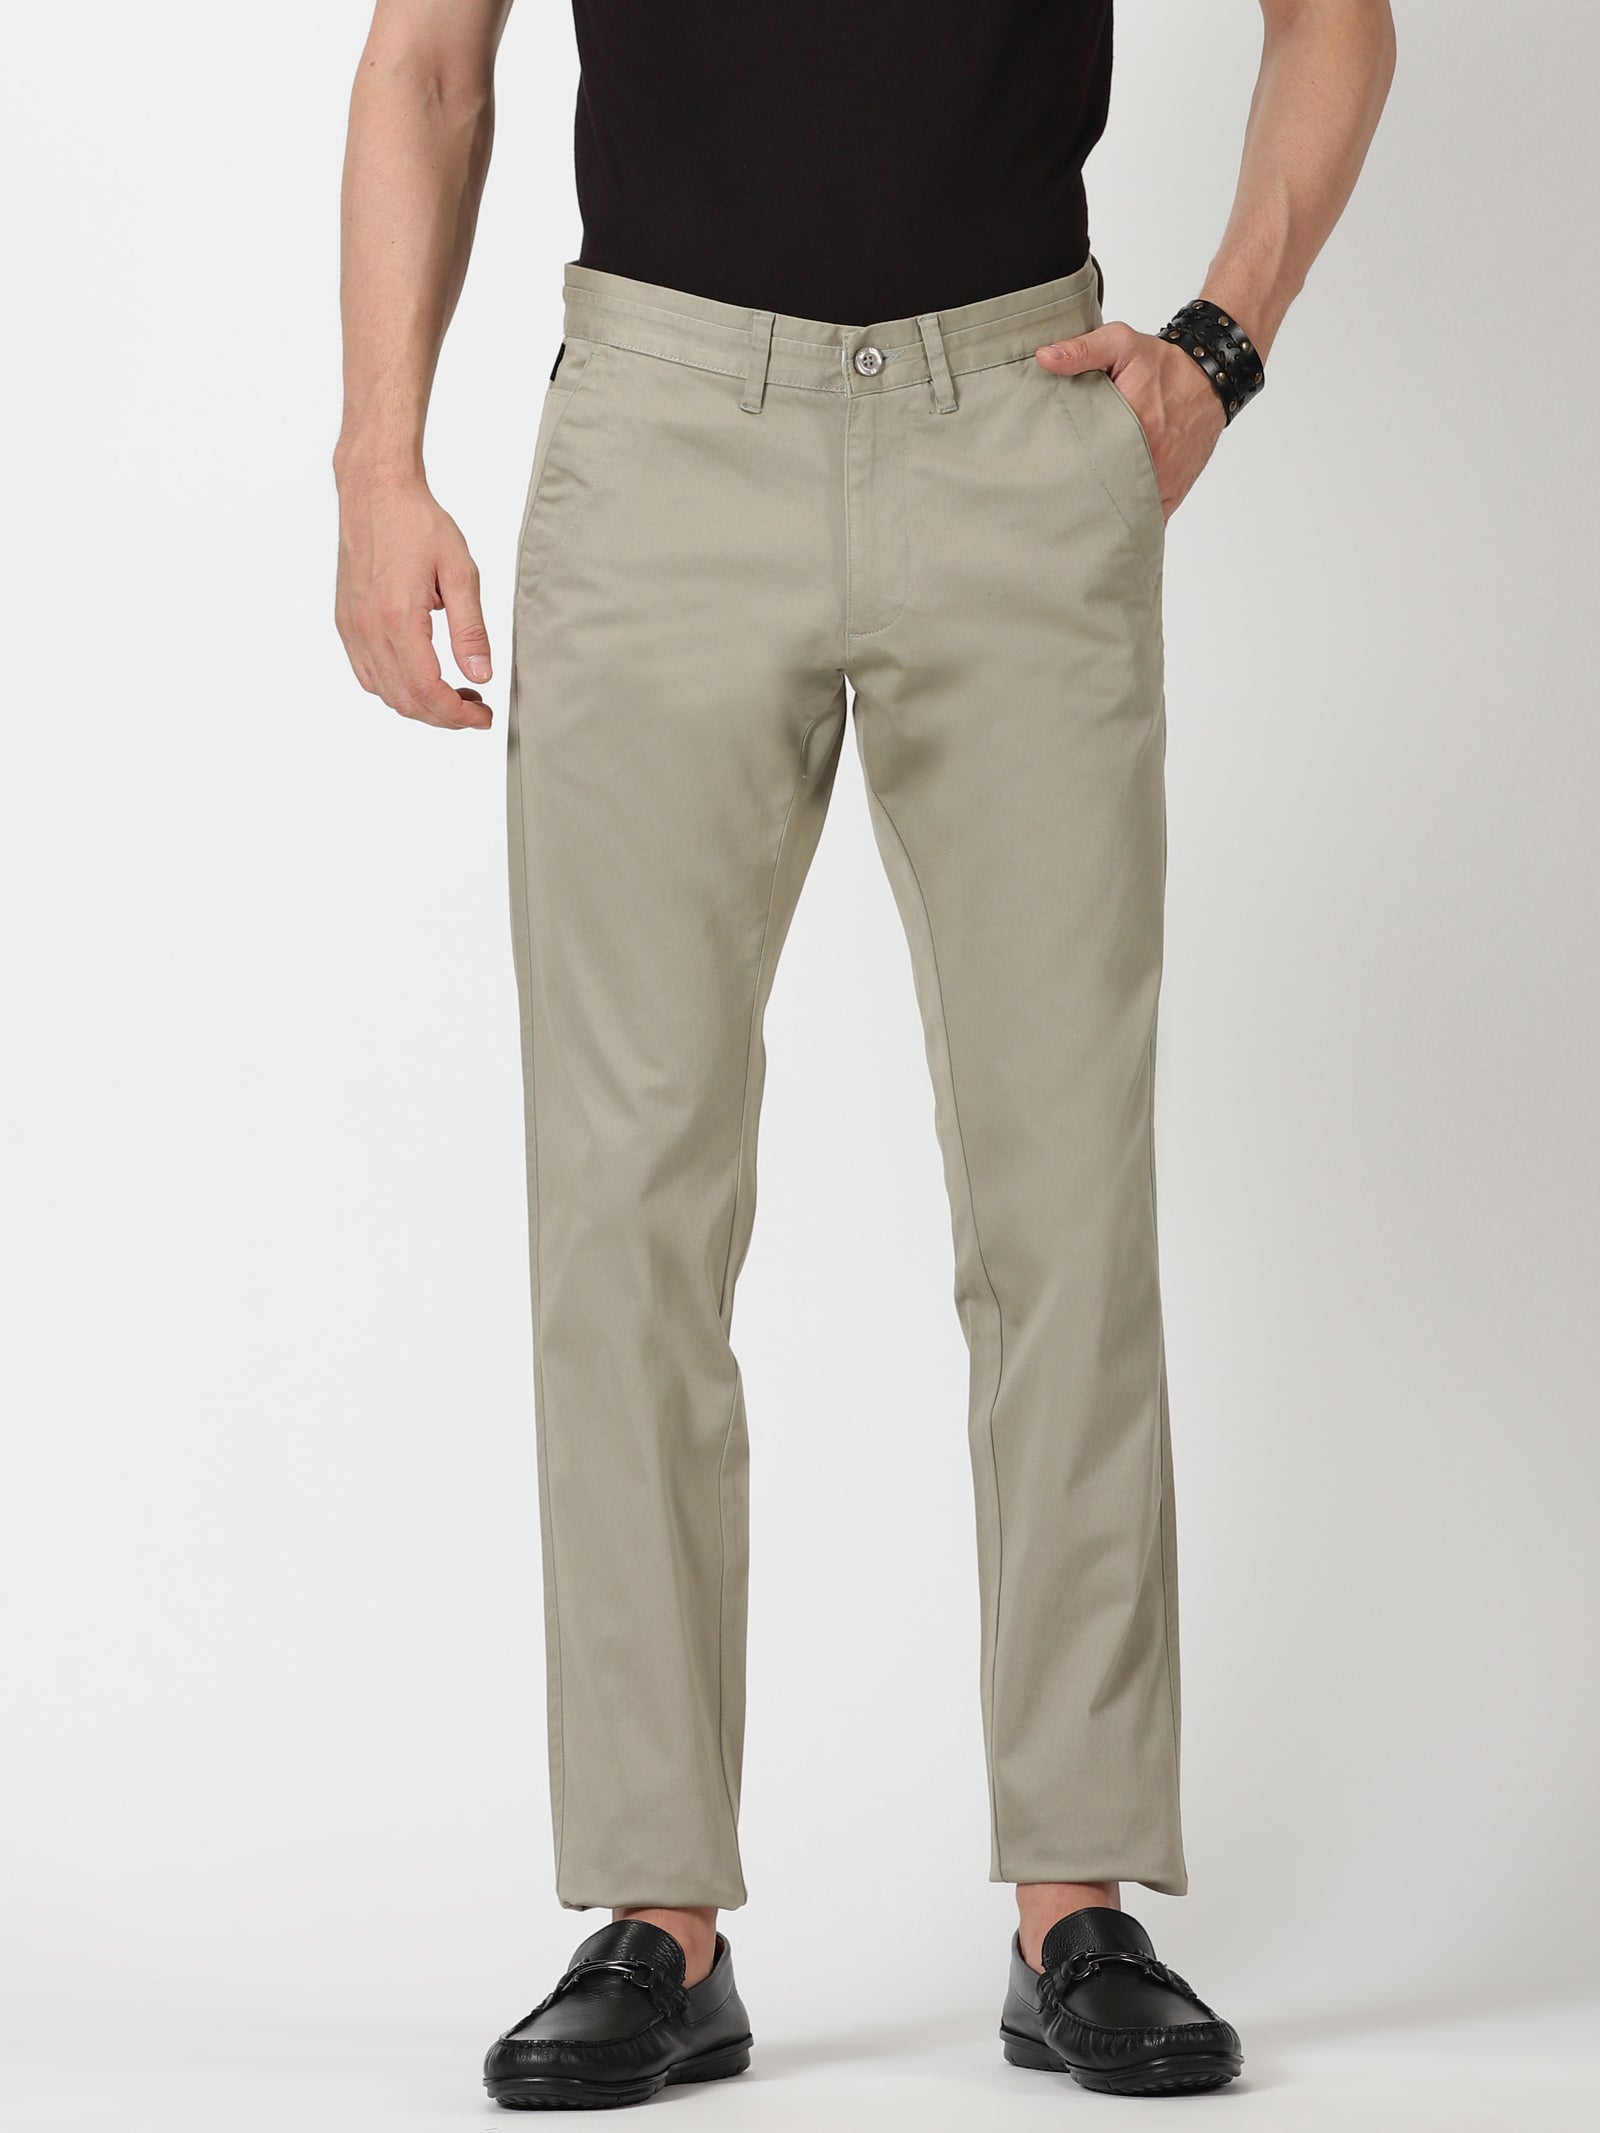 Buy Louis Philippe Cream Trousers Online  779801  Louis Philippe